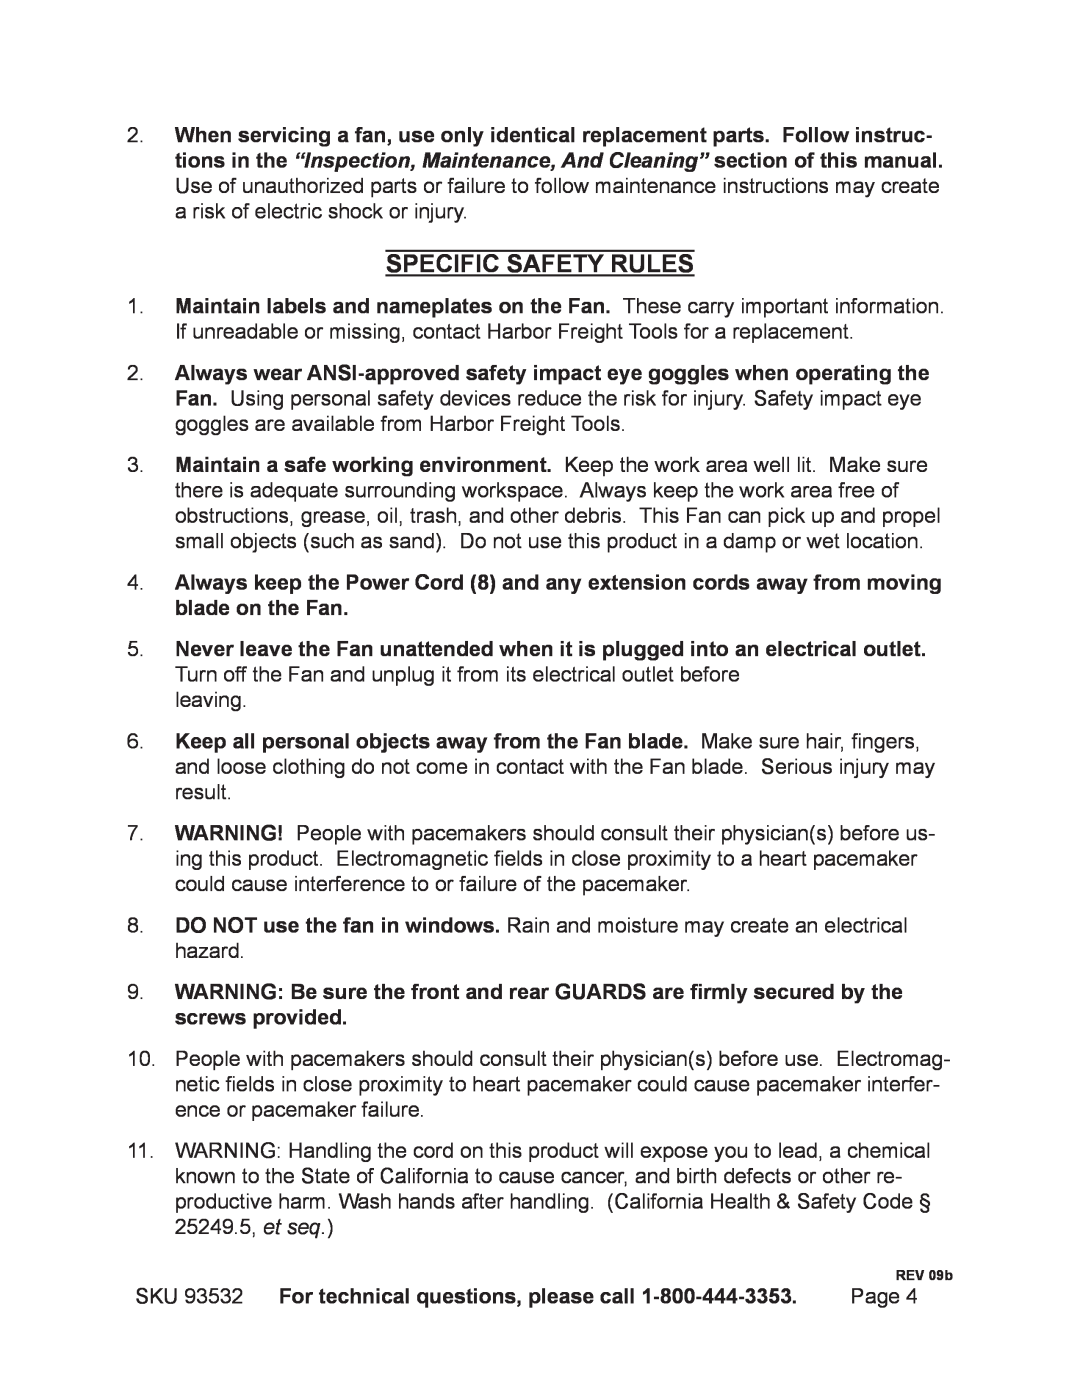 Harbor Freight Tools 93532 manual Specific Safety Rules 